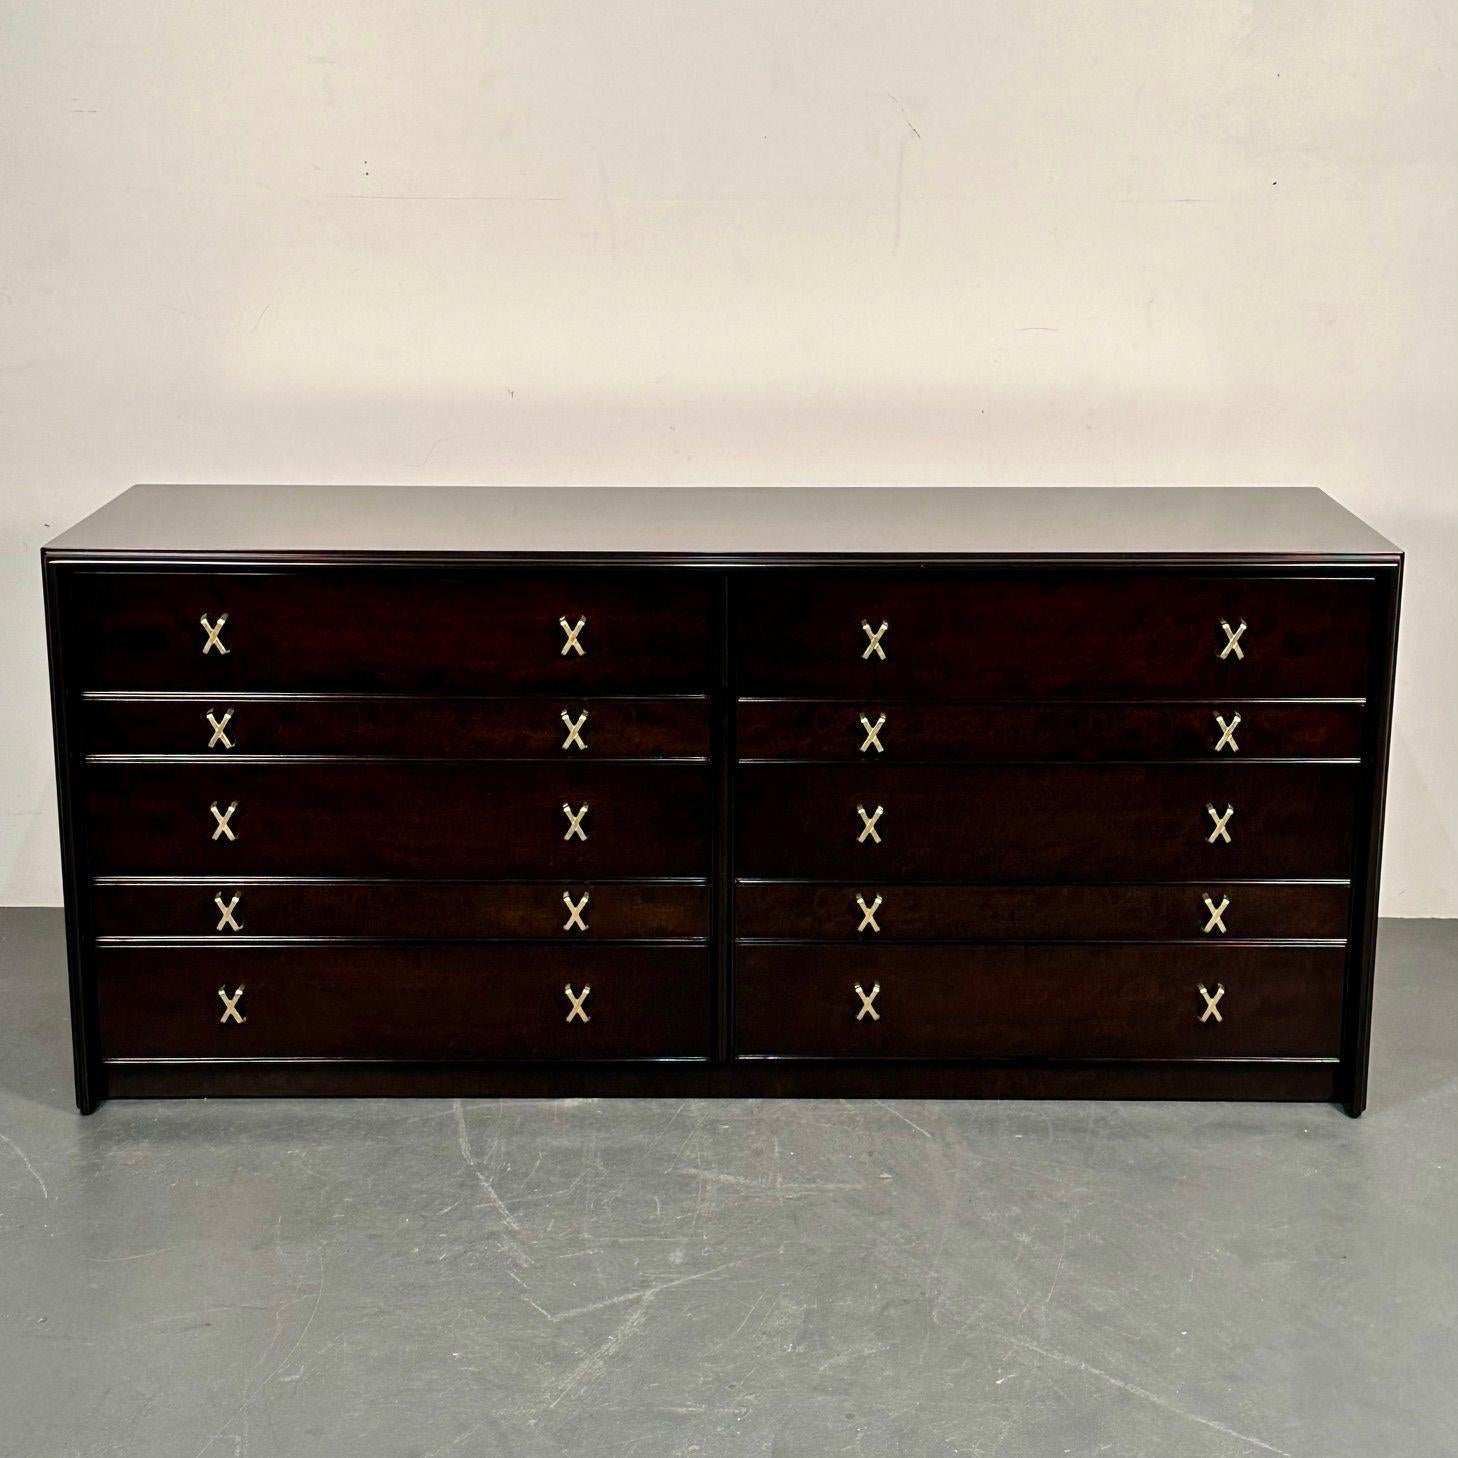 Mid-Century Modern Paul Frankl Mahogany Dresser, Stamped John Stuart, Brass

Mid century double dresser designed by Paul Frankl for John Stuart; recently fully refinished. The custom 'X' style brass drawer pulls have been refurbished allowing their